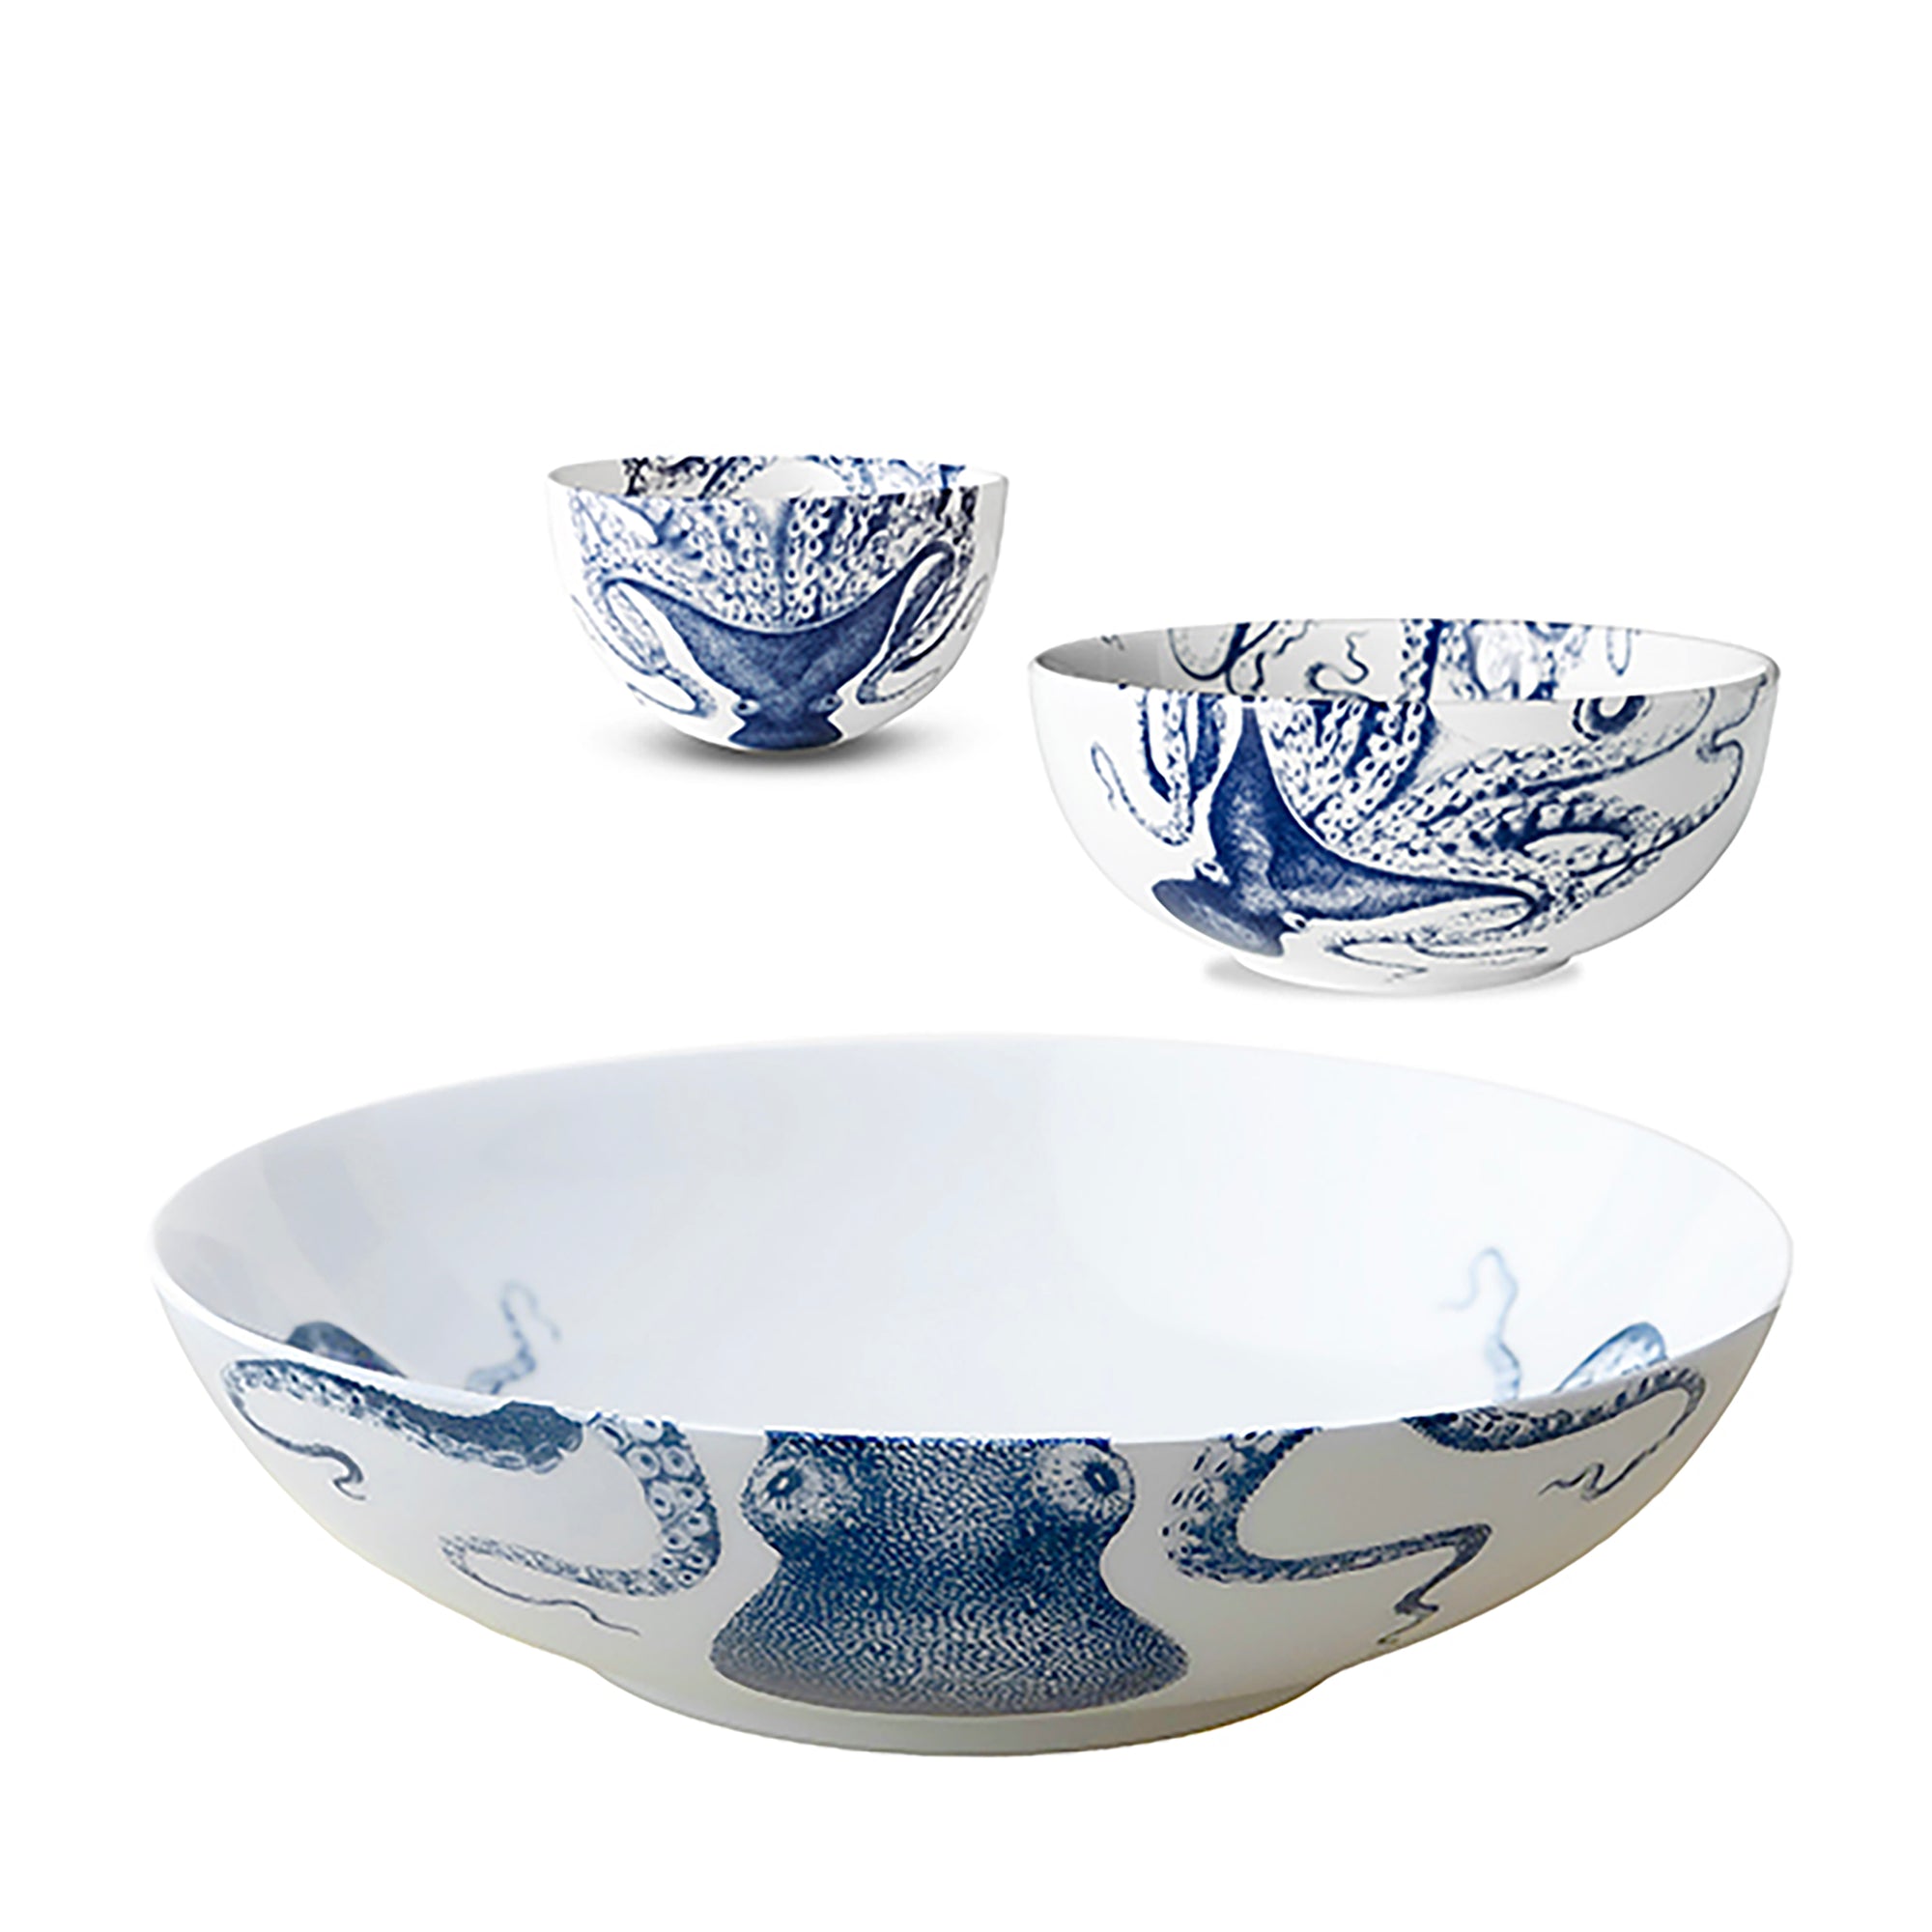 Three bowls with octopus designs on them.